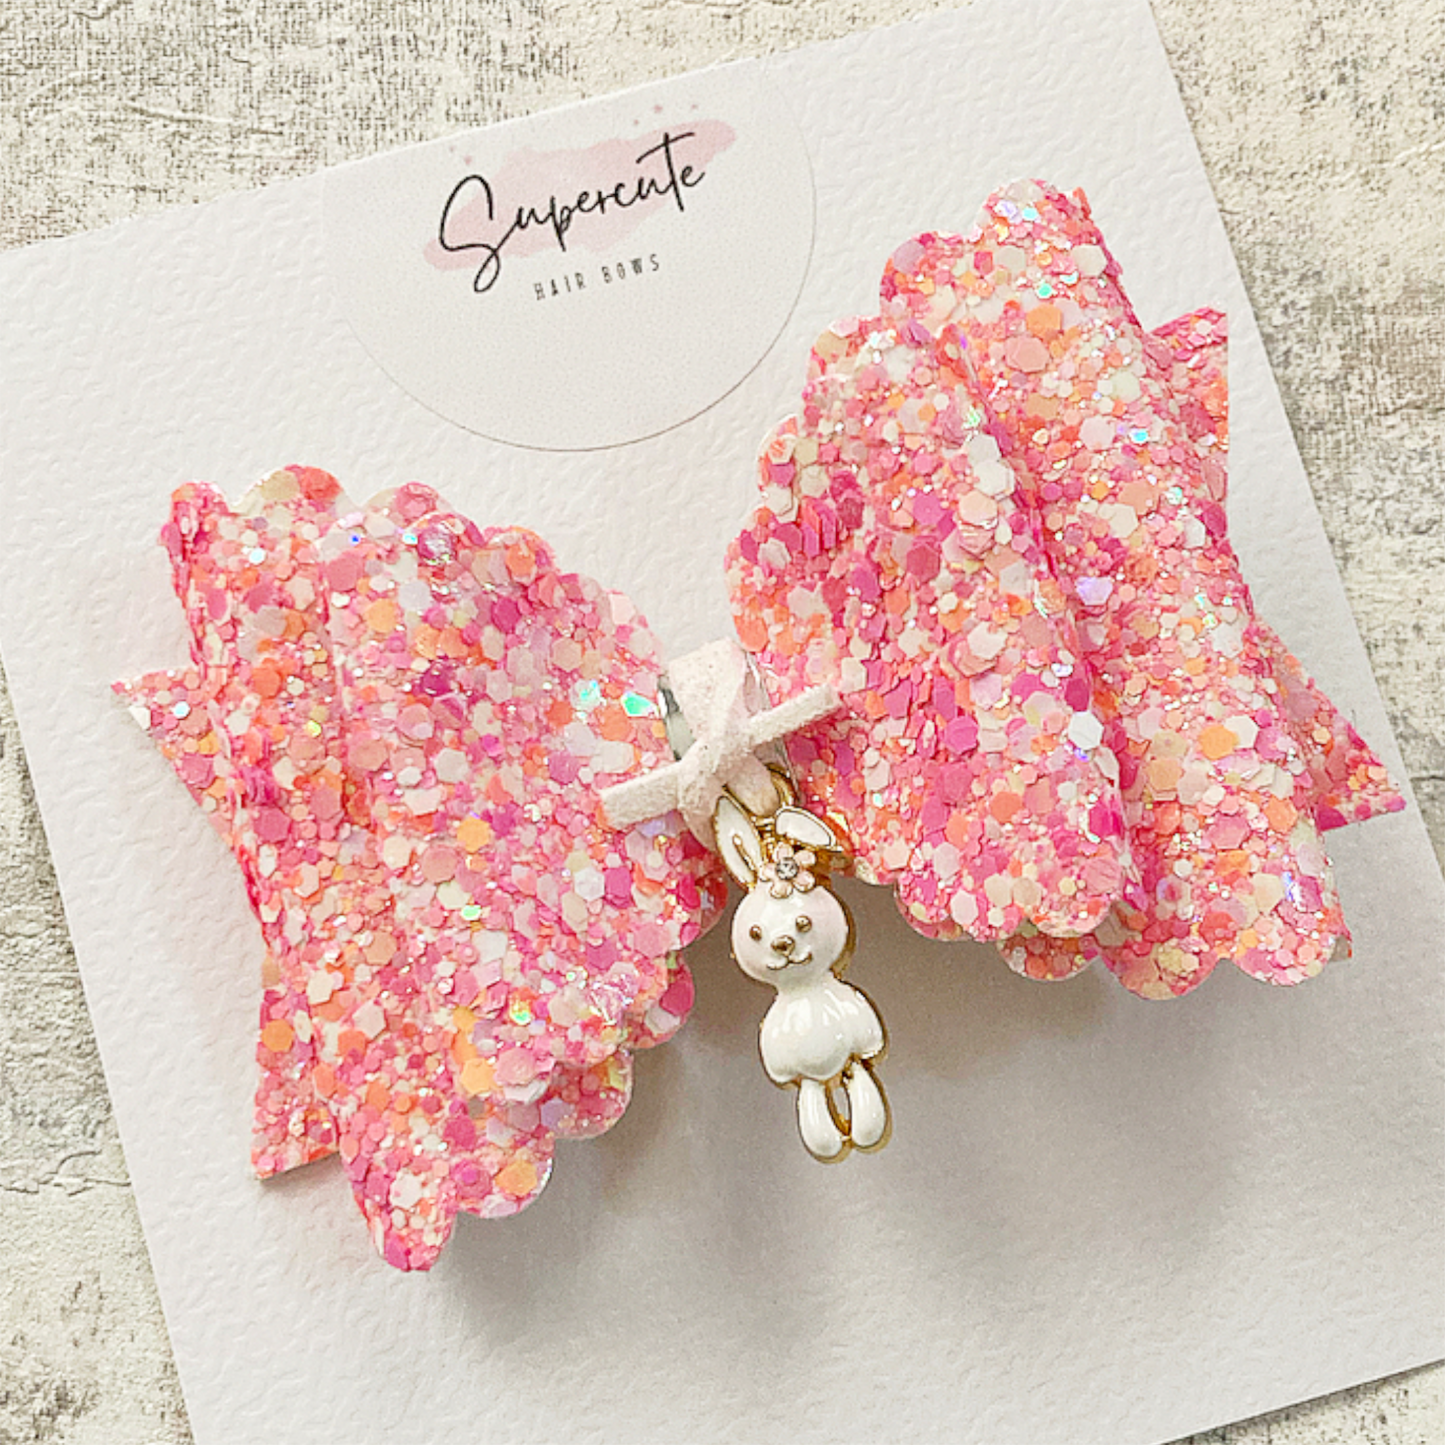 A pink mix chunky glitter hair bow with a little rabbit dangling charm 